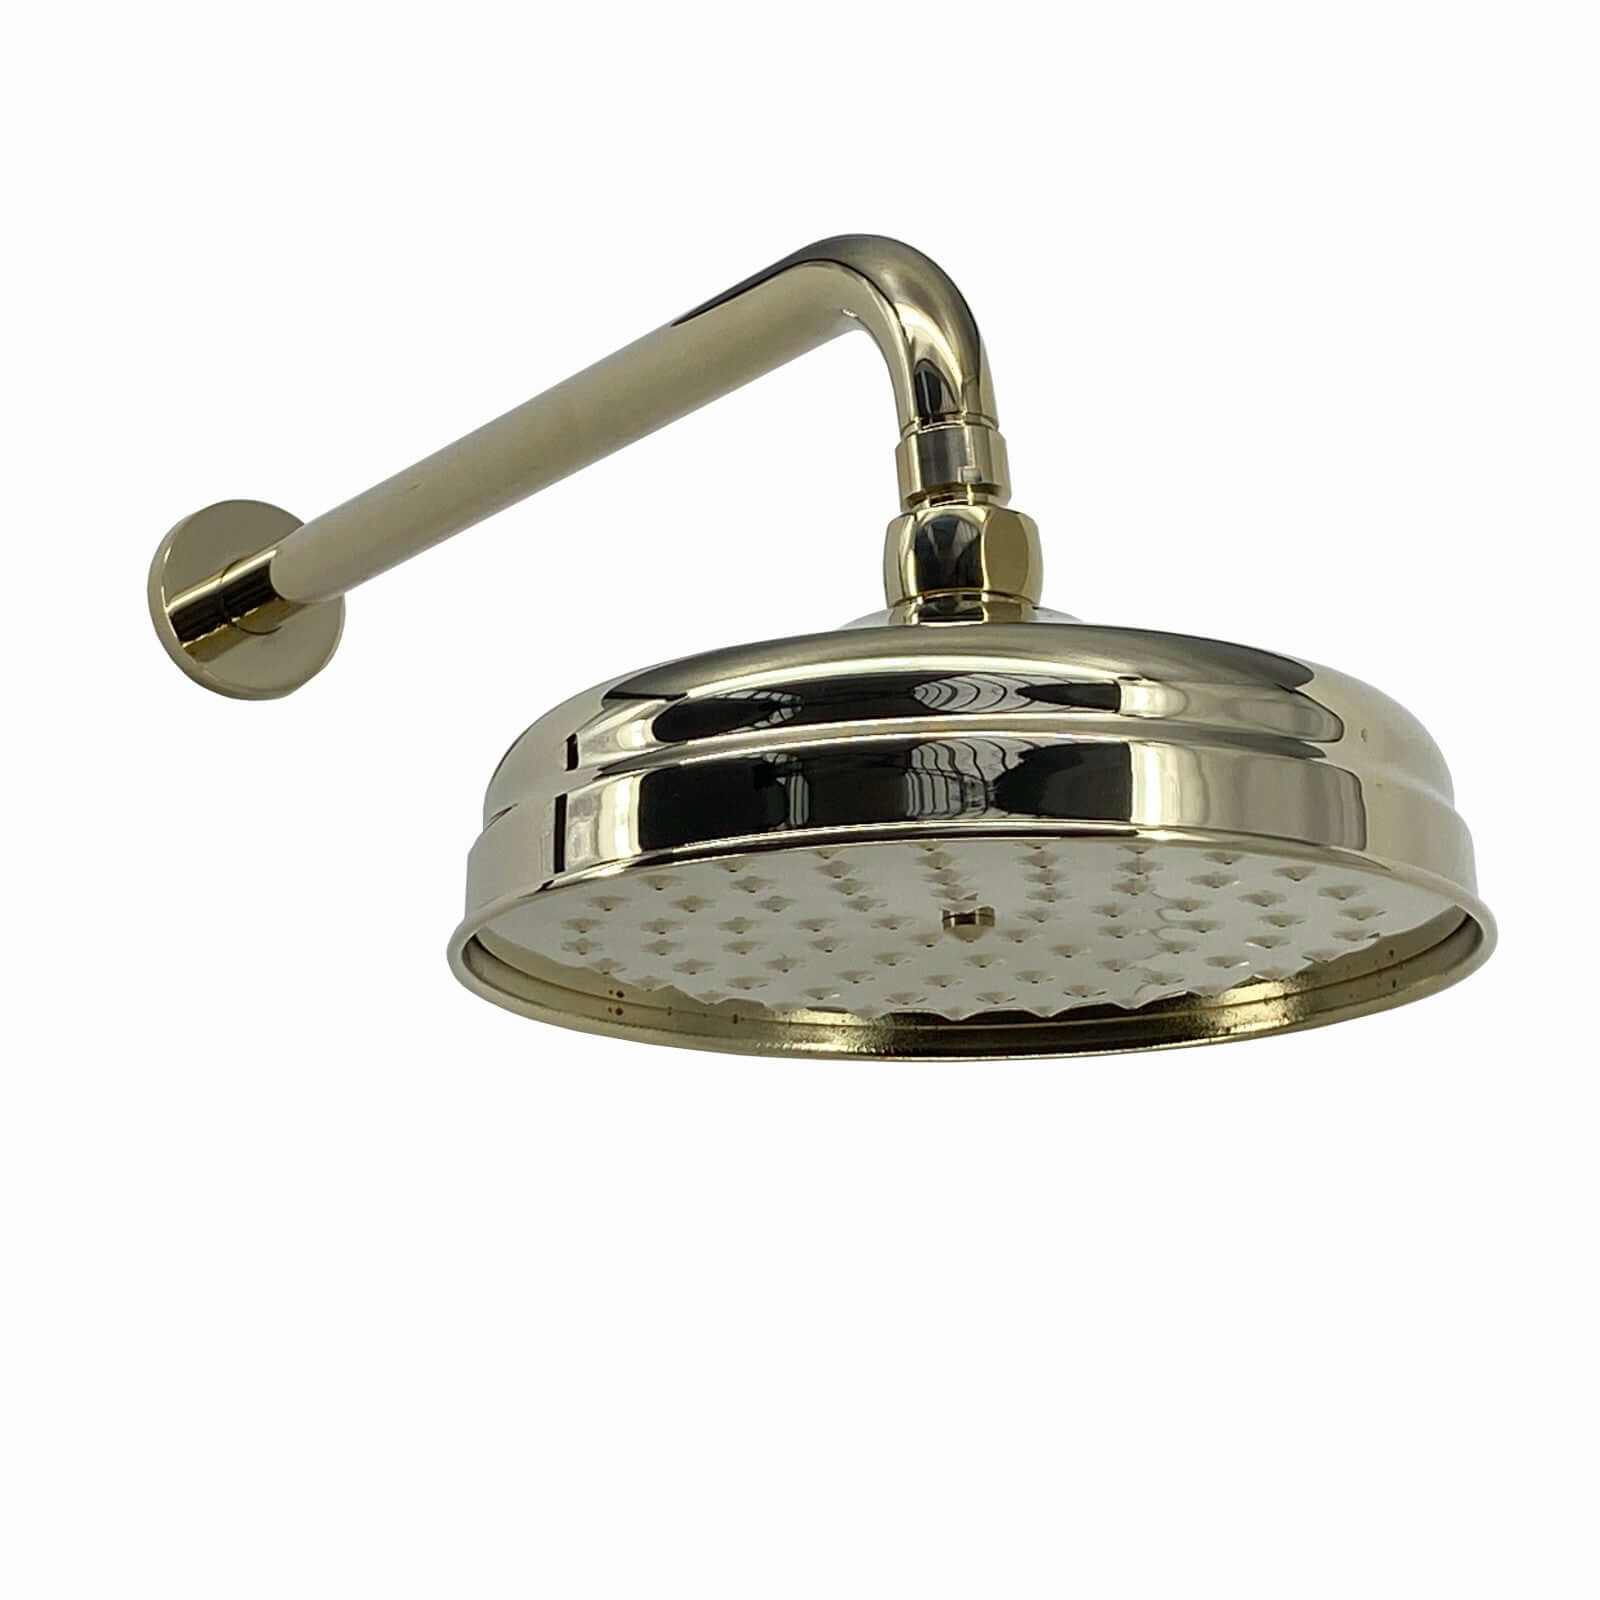 SH0278-03-RA057-01-traditional-wall-fixed-apron-brass-shower-head-8-with-shower-arm-english-gold